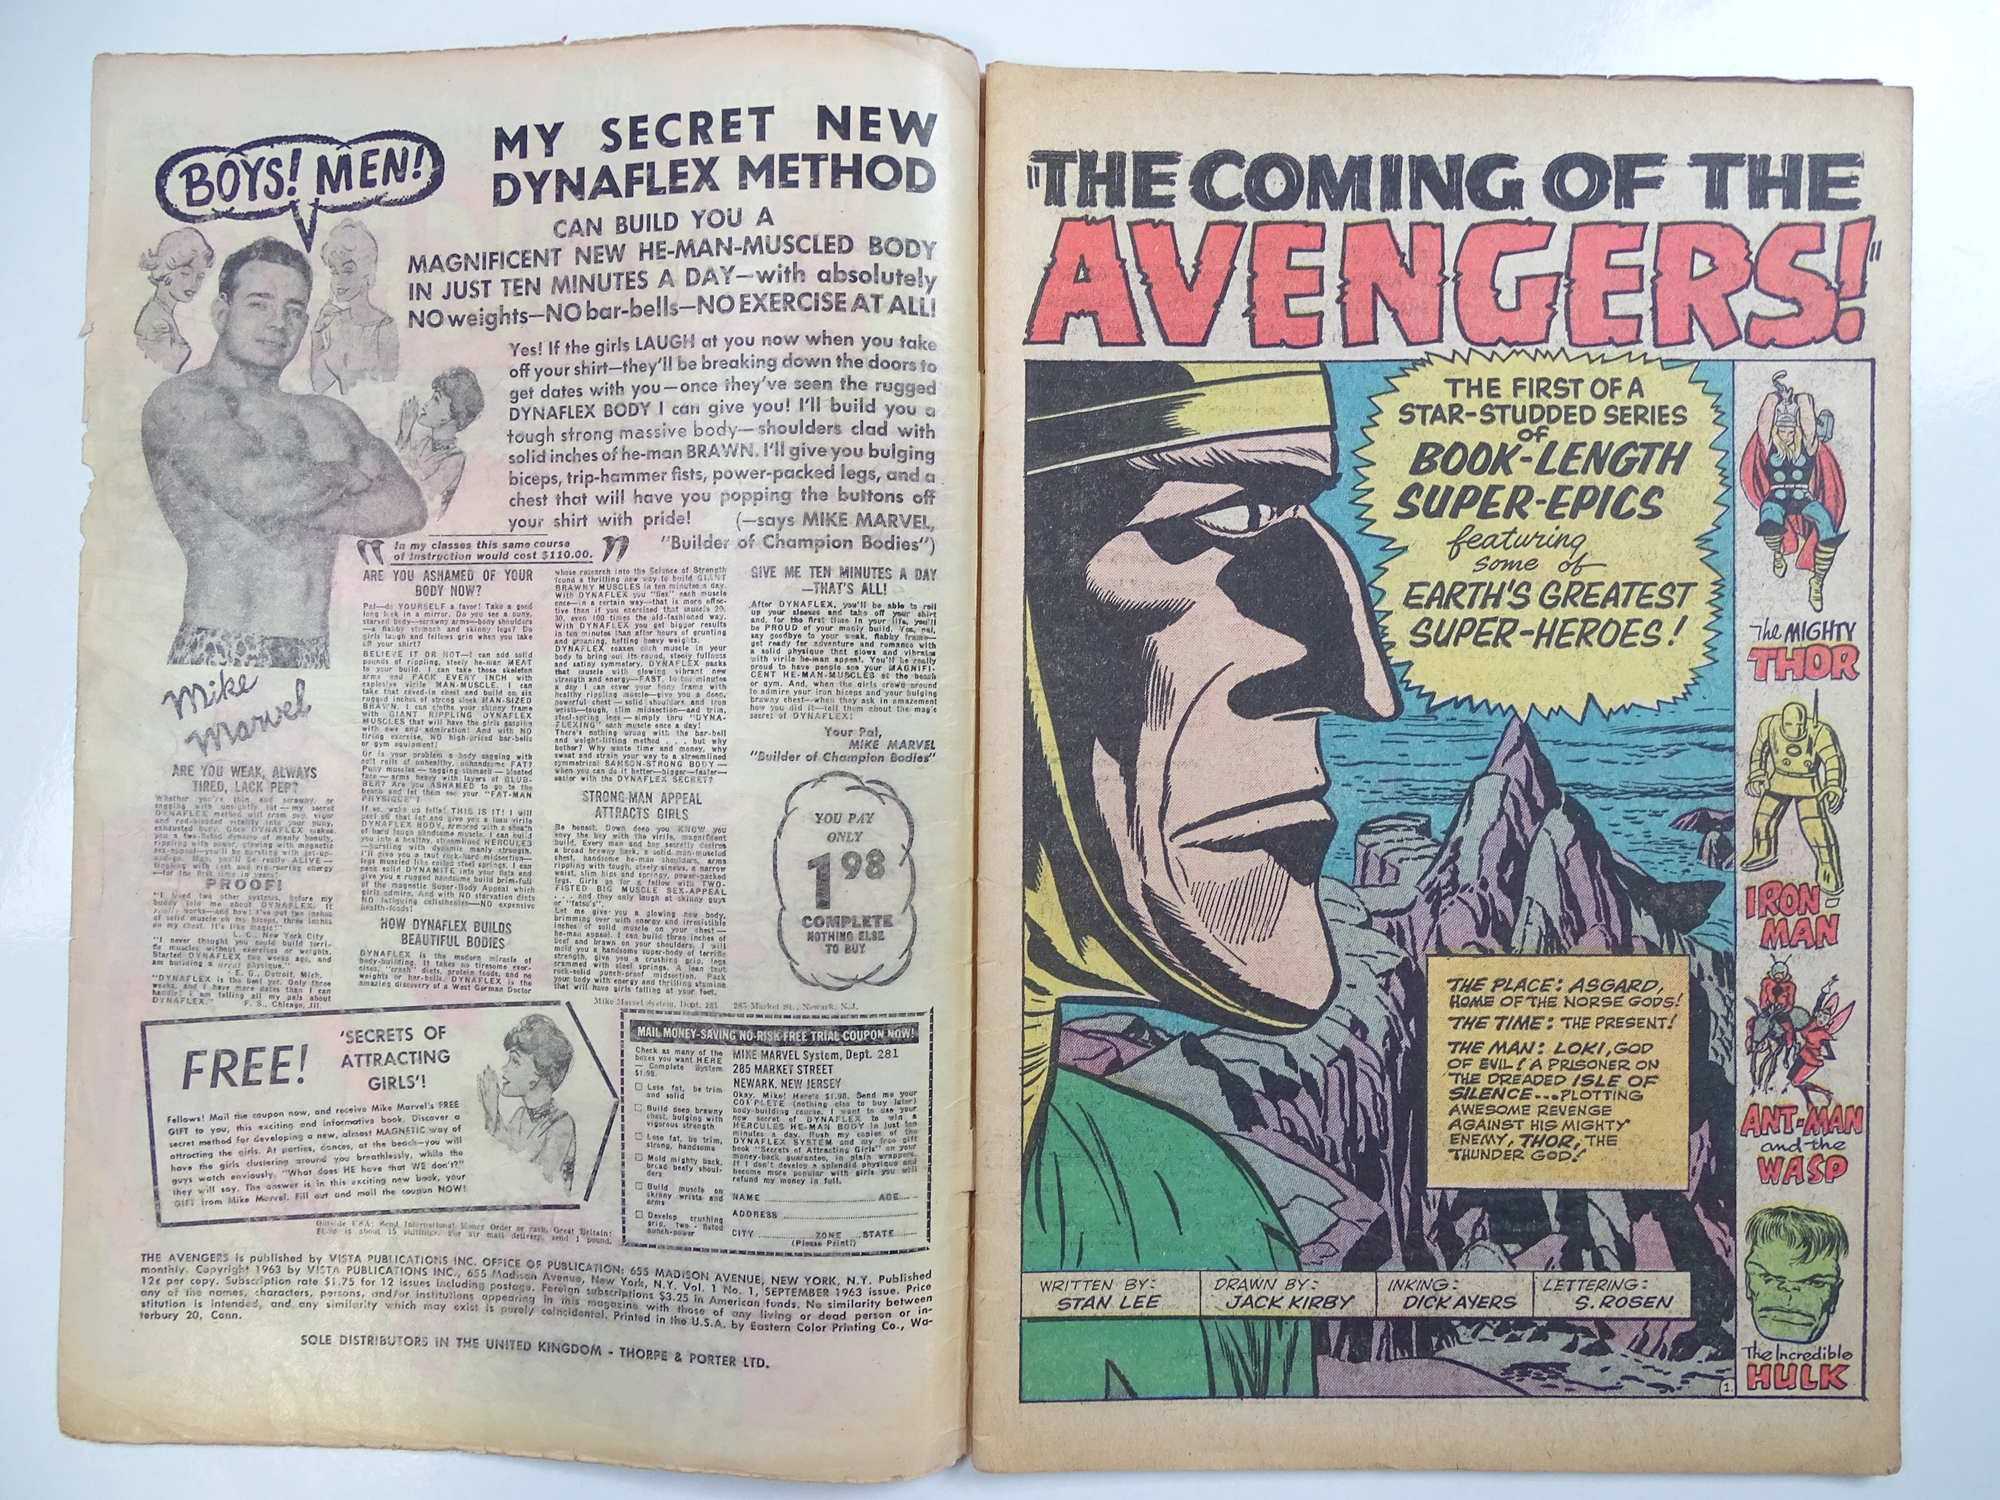 AVENGERS #1 - (1963 - MARVEL - UK Price Variant) - First appearance of the Avengers with original - Image 3 of 6